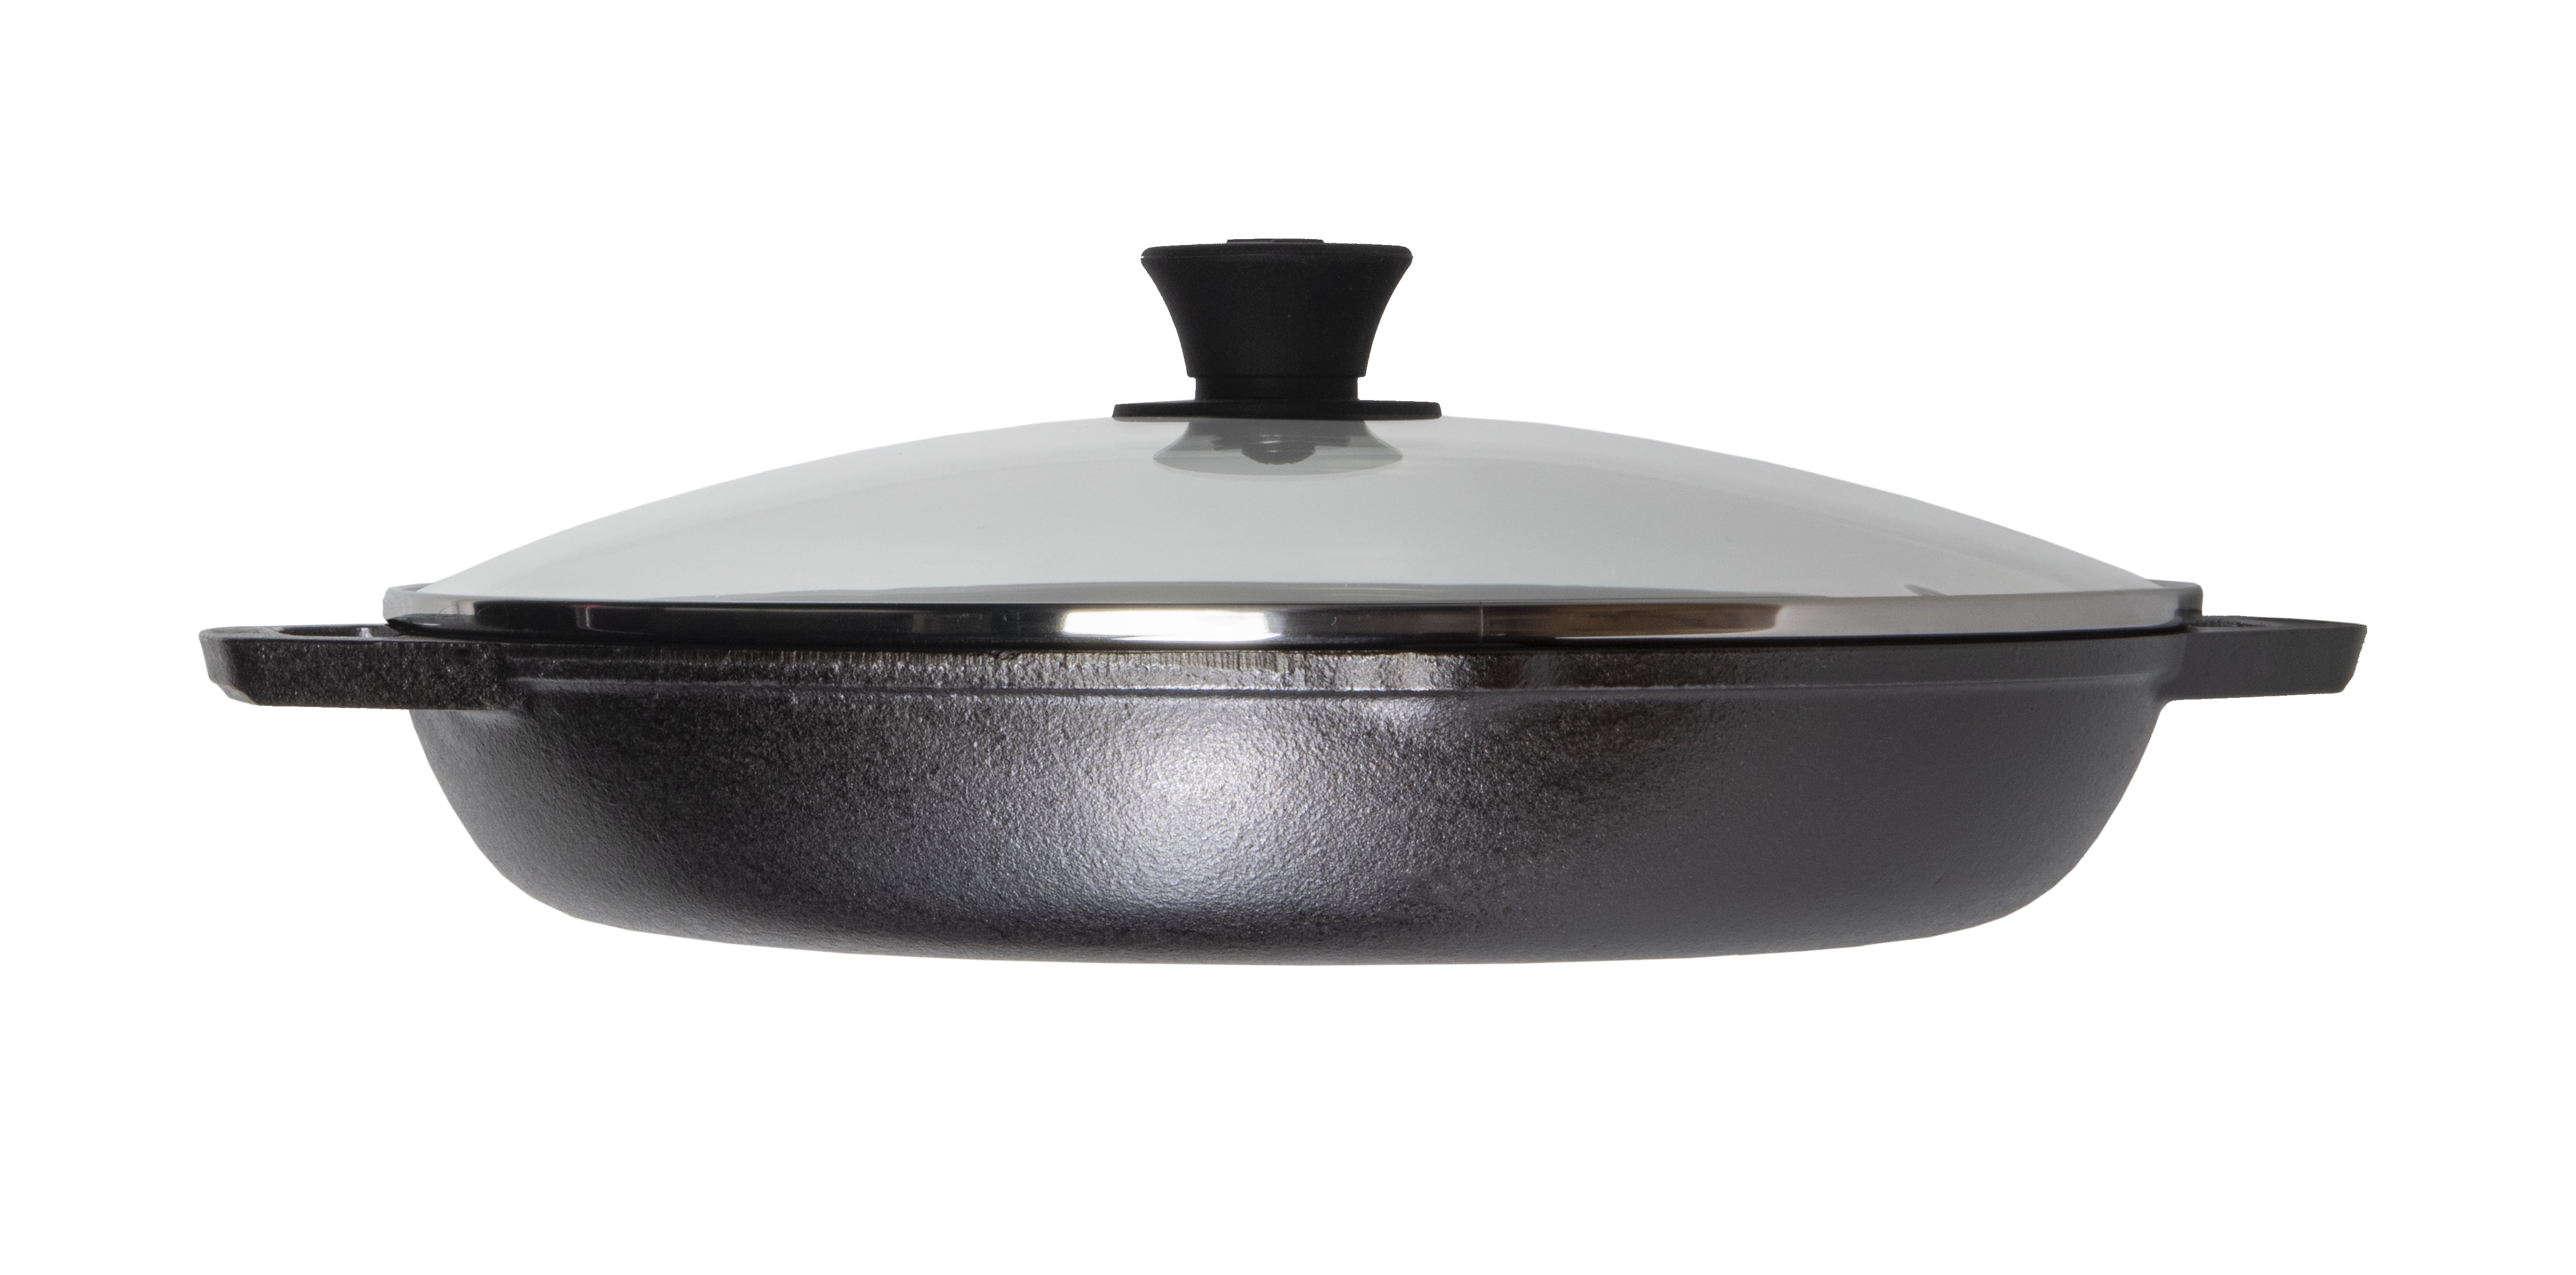 10.25 Inch Fits Lodge 10.25 Inch Cast Iron Skillets and 5 Quart Dutch Ovens Lodge Tempered Glass Lid 